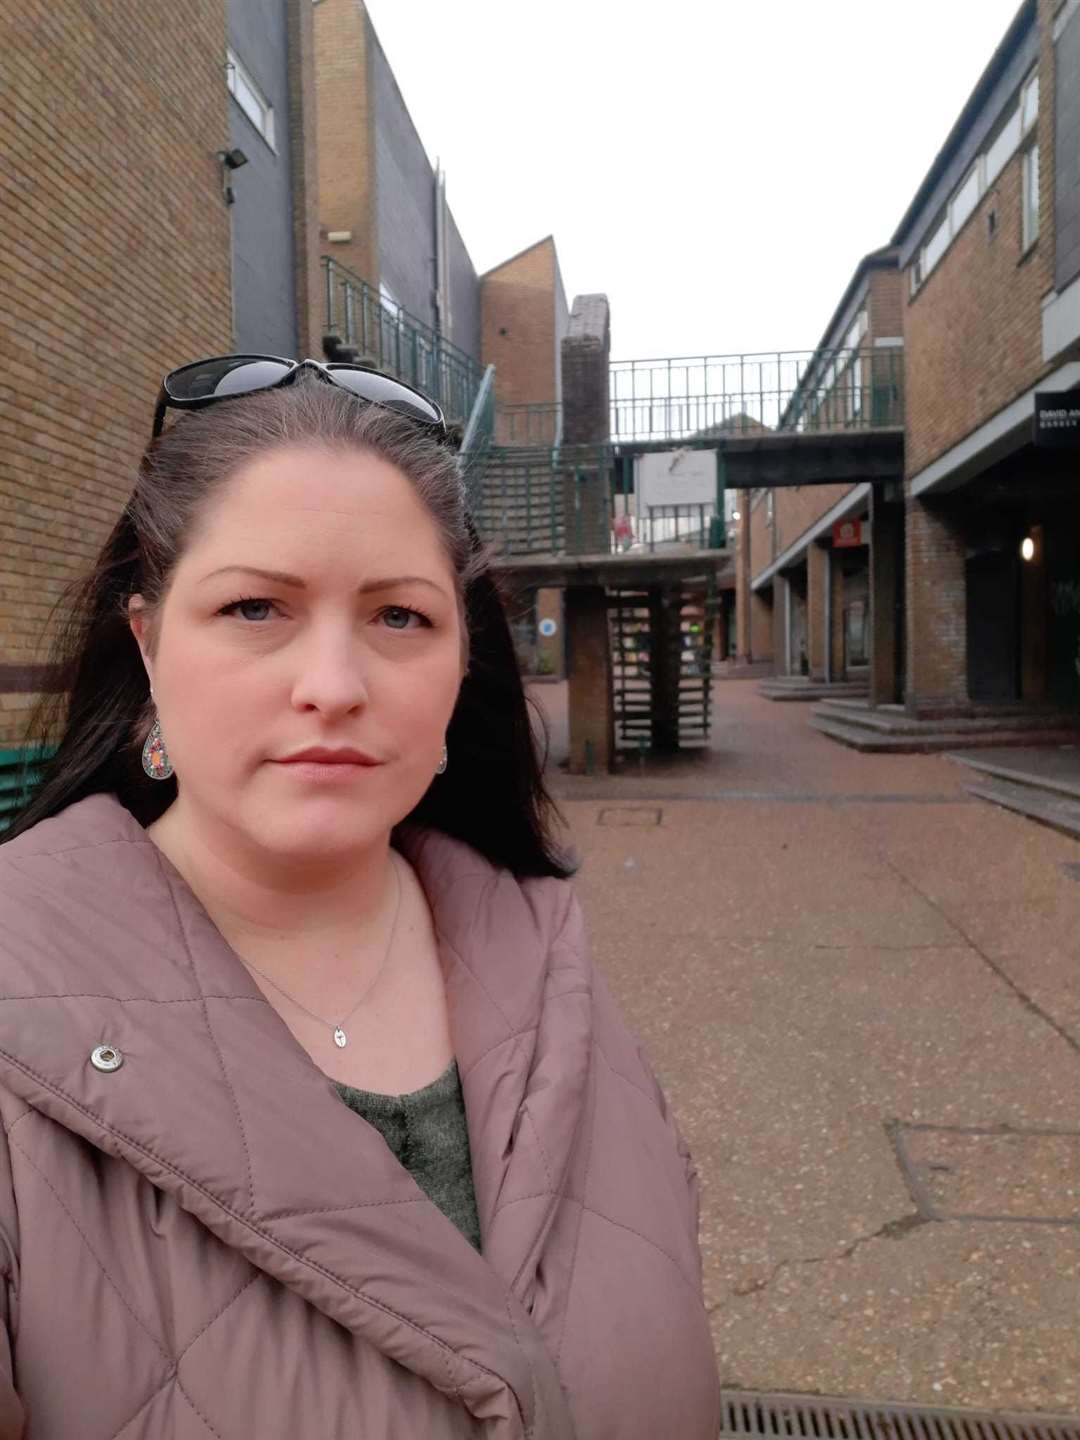 Cllr Laura Manston is concerned over the use of the drug